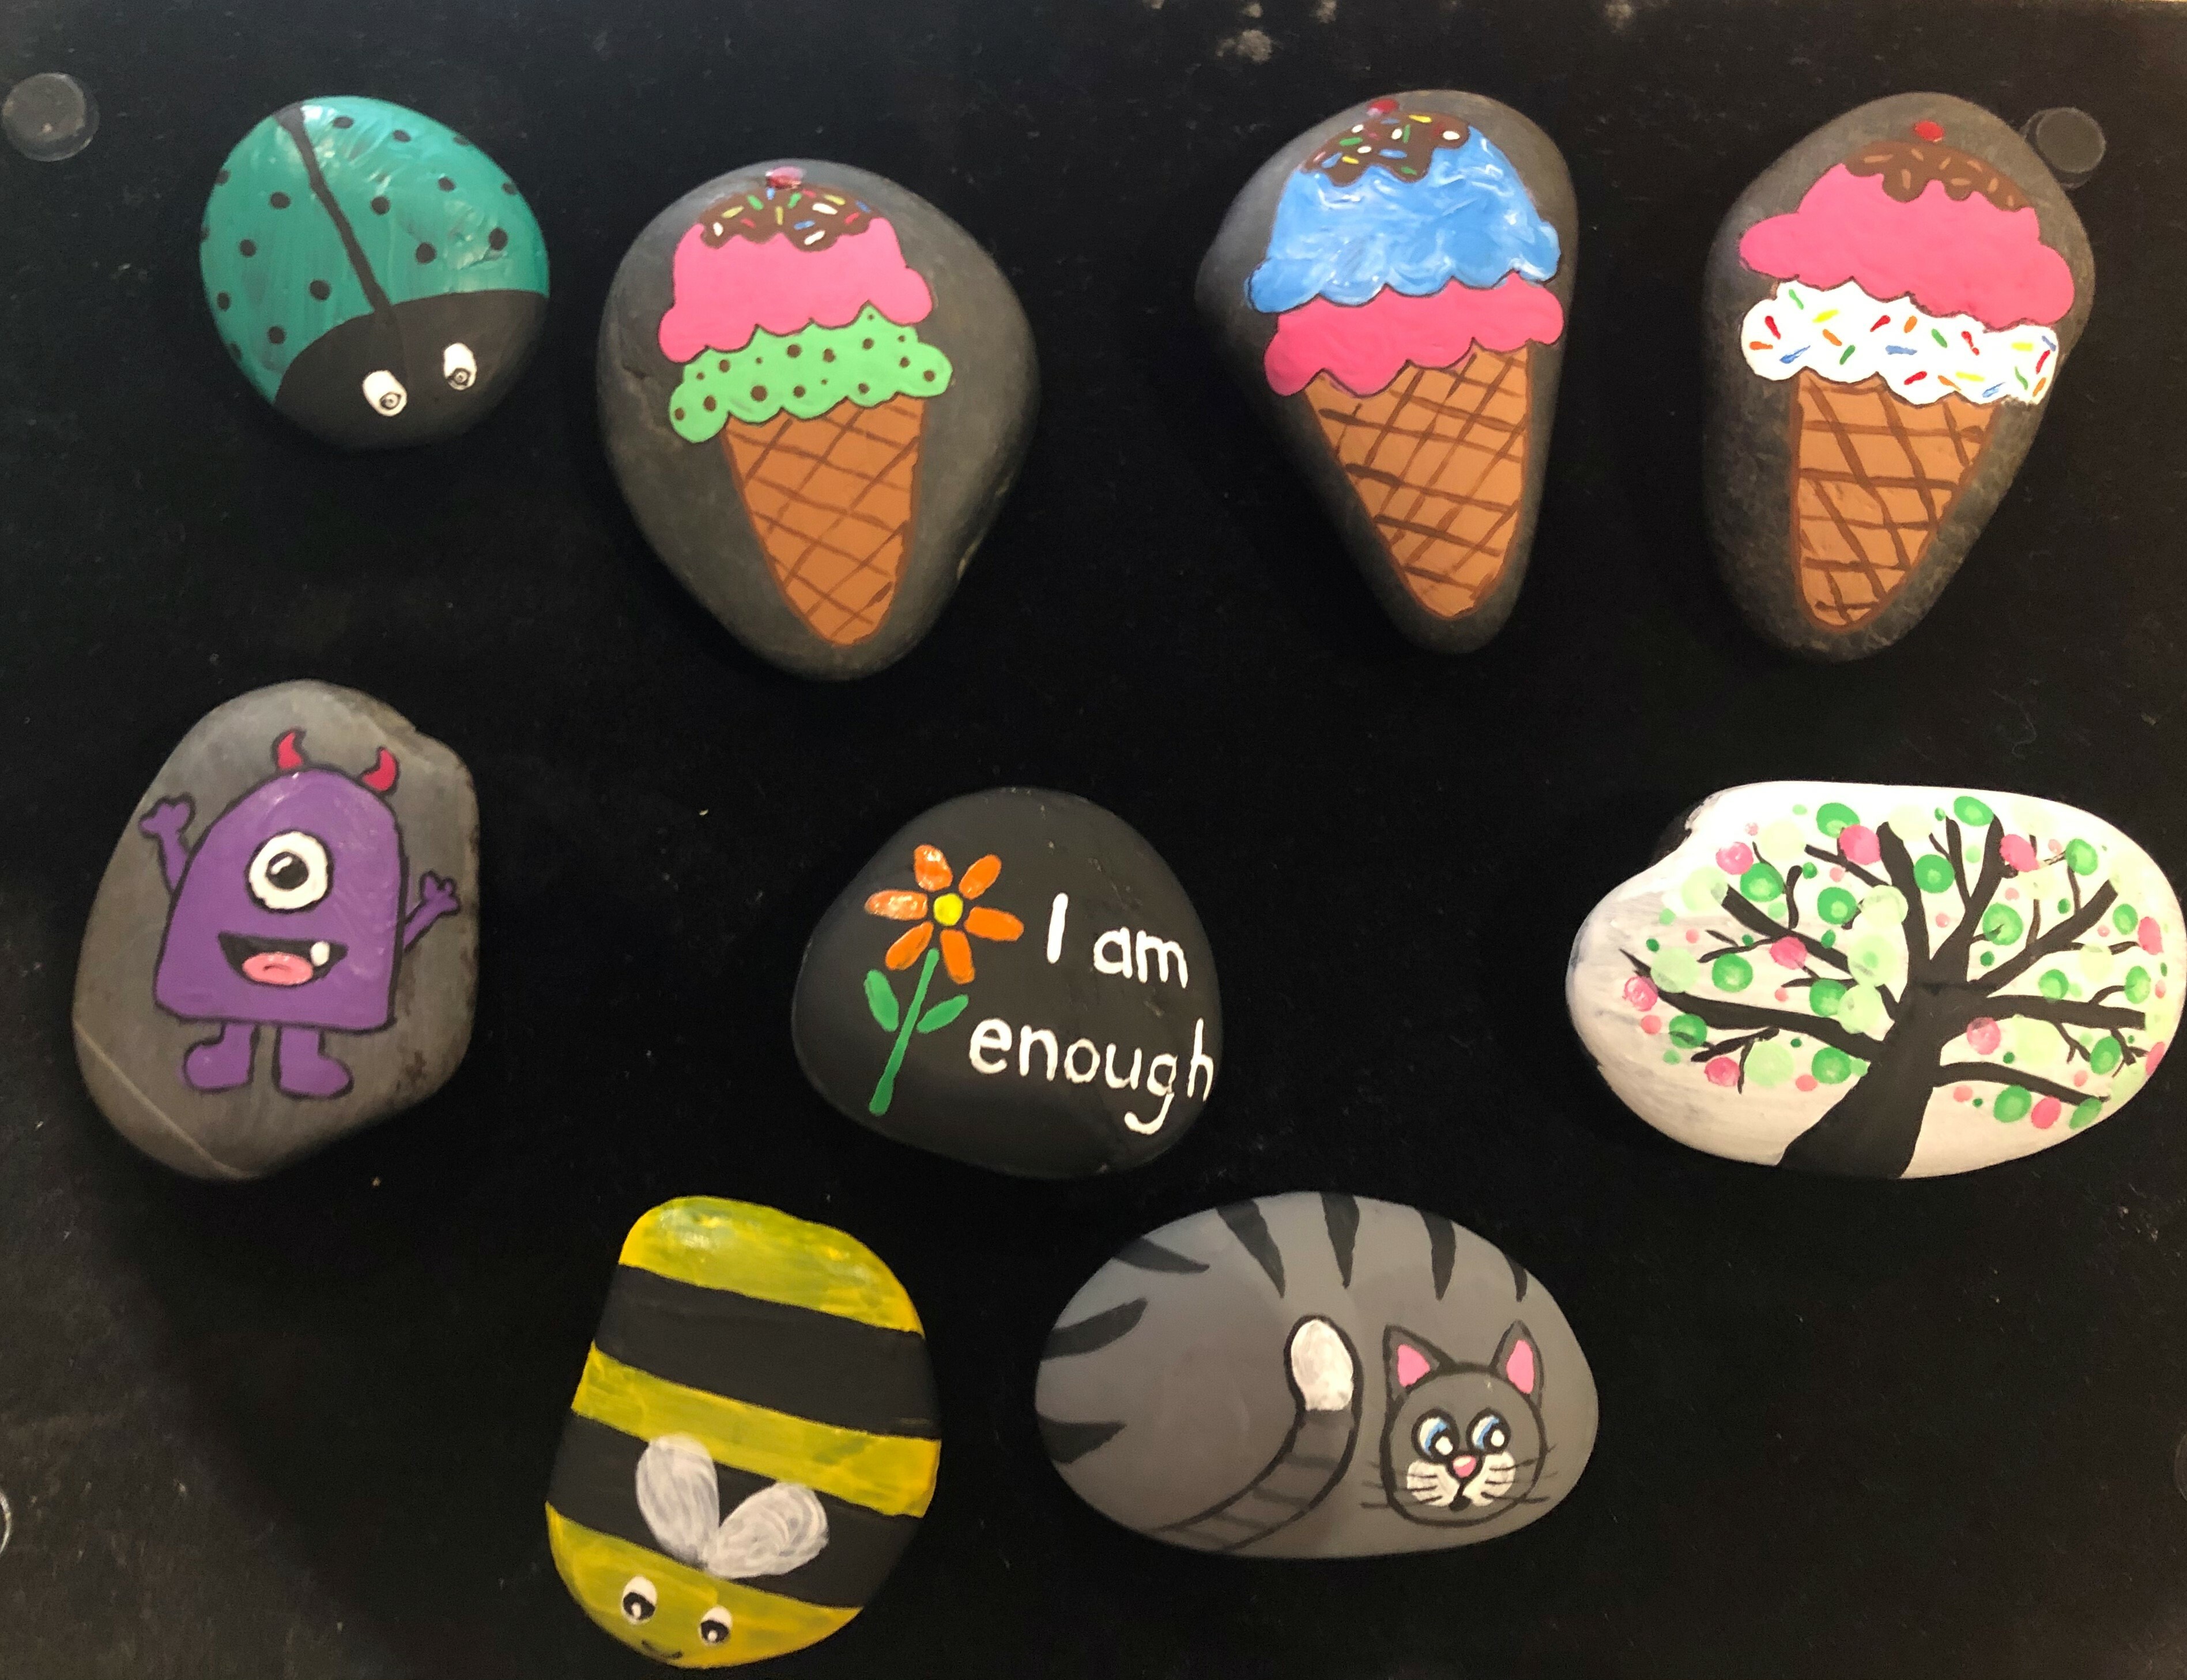 Tracey has been hand-painting rocks as a way to engage with her local community during lockdown.